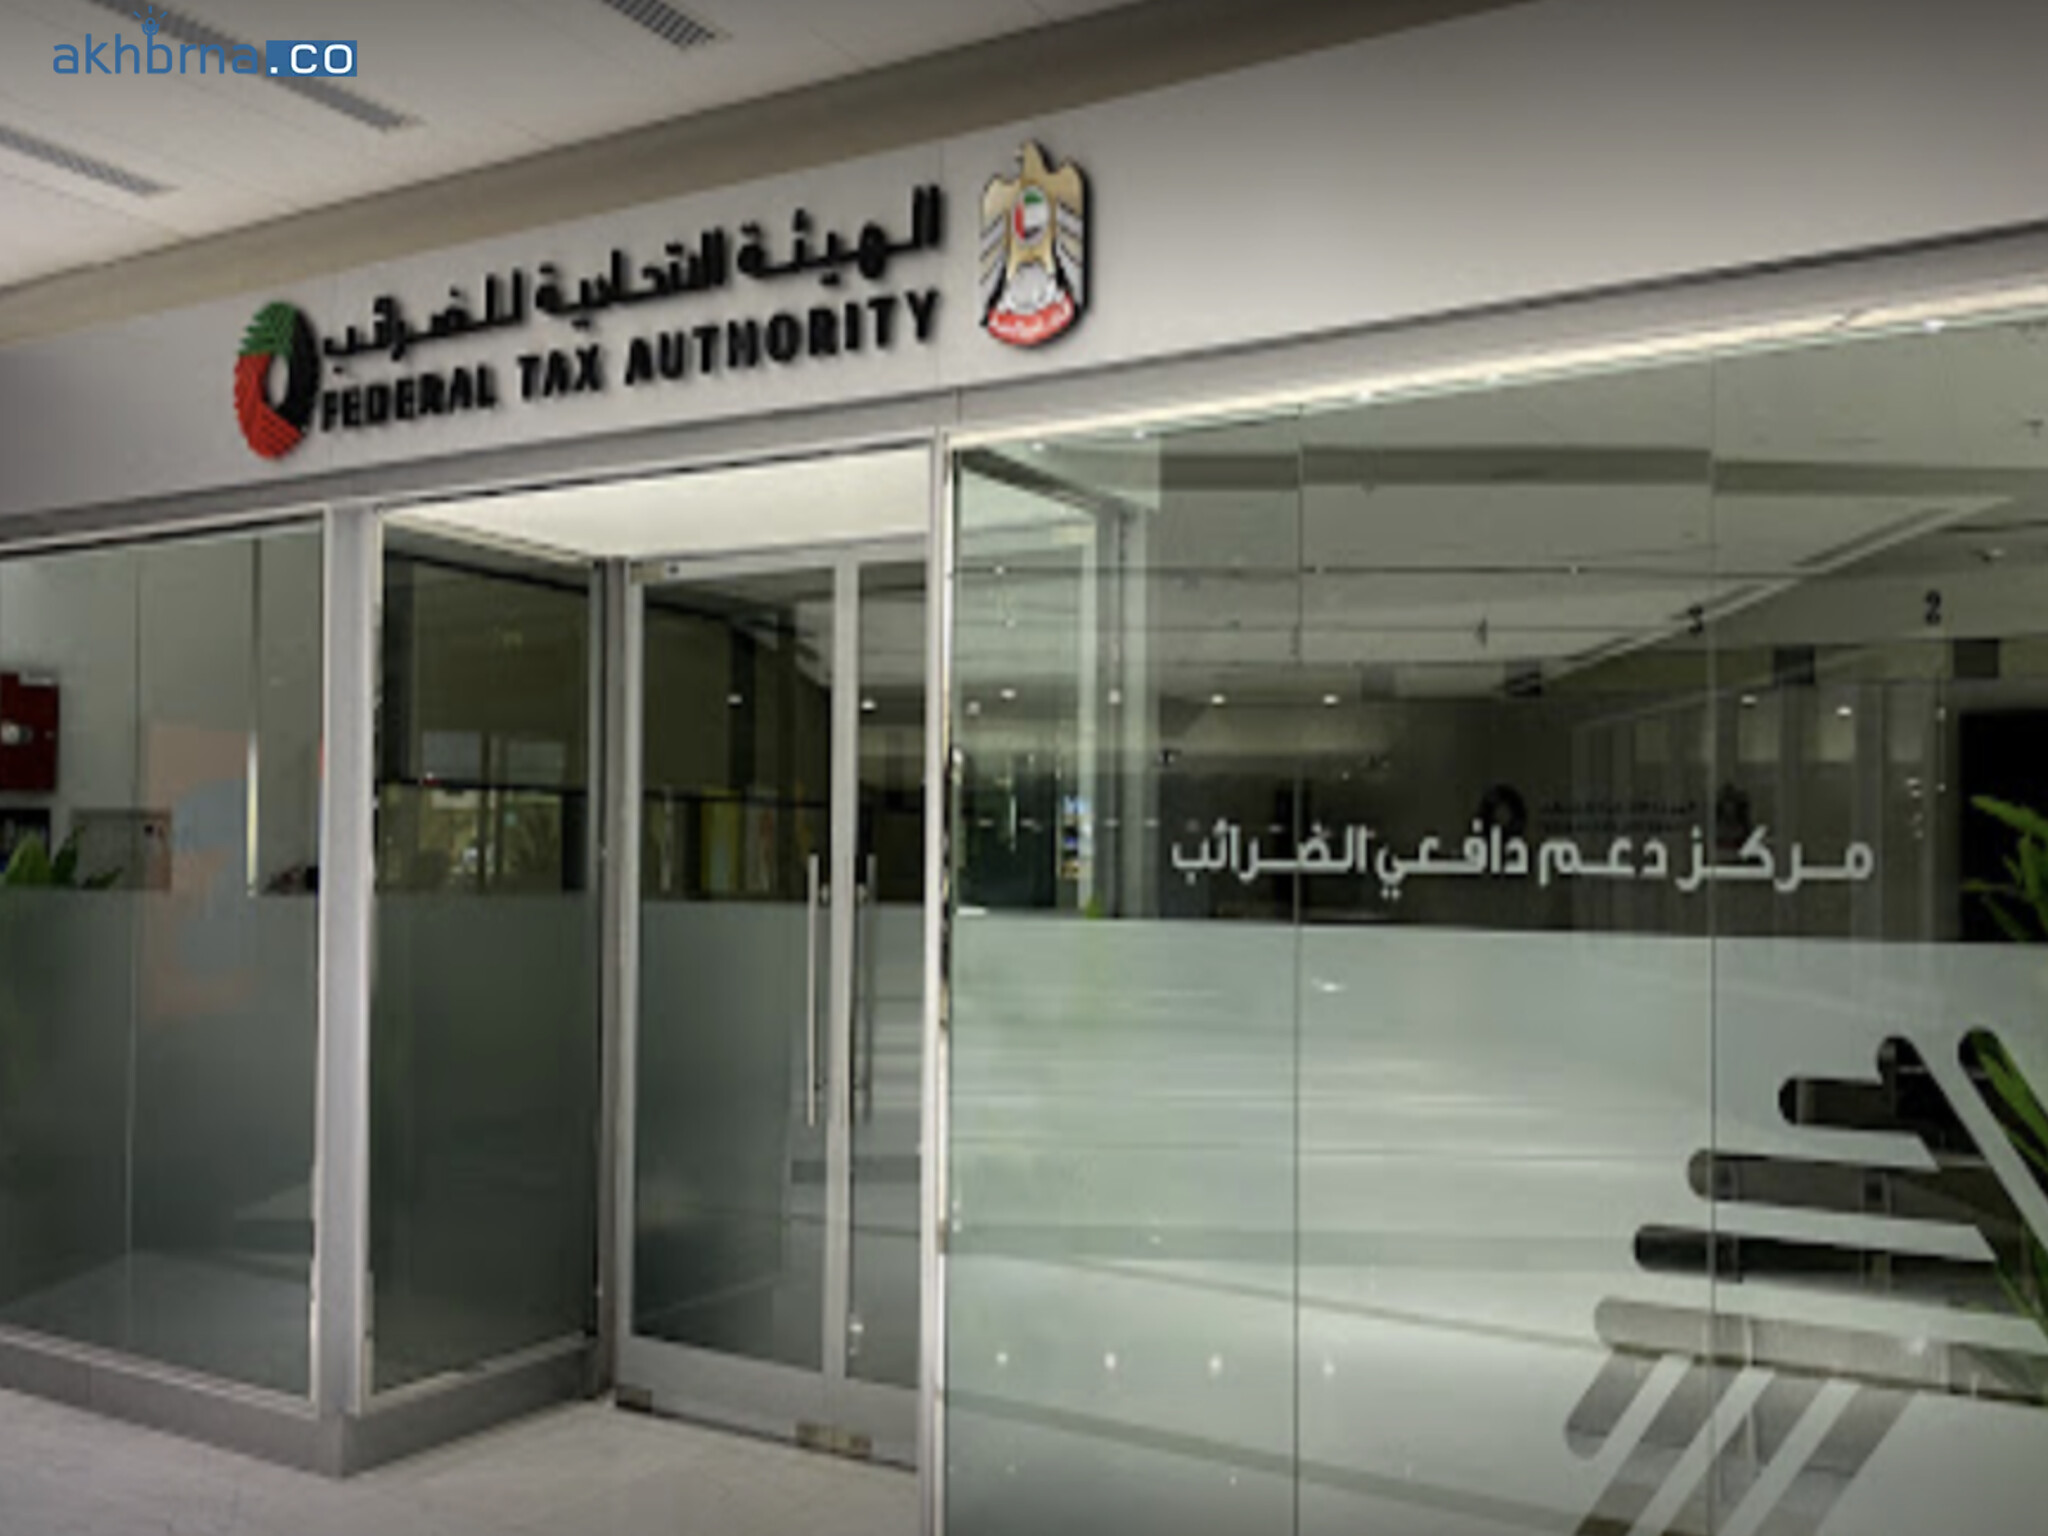 The UAE Federal Tax Authority sets 13 rights and obligations for taxpayers